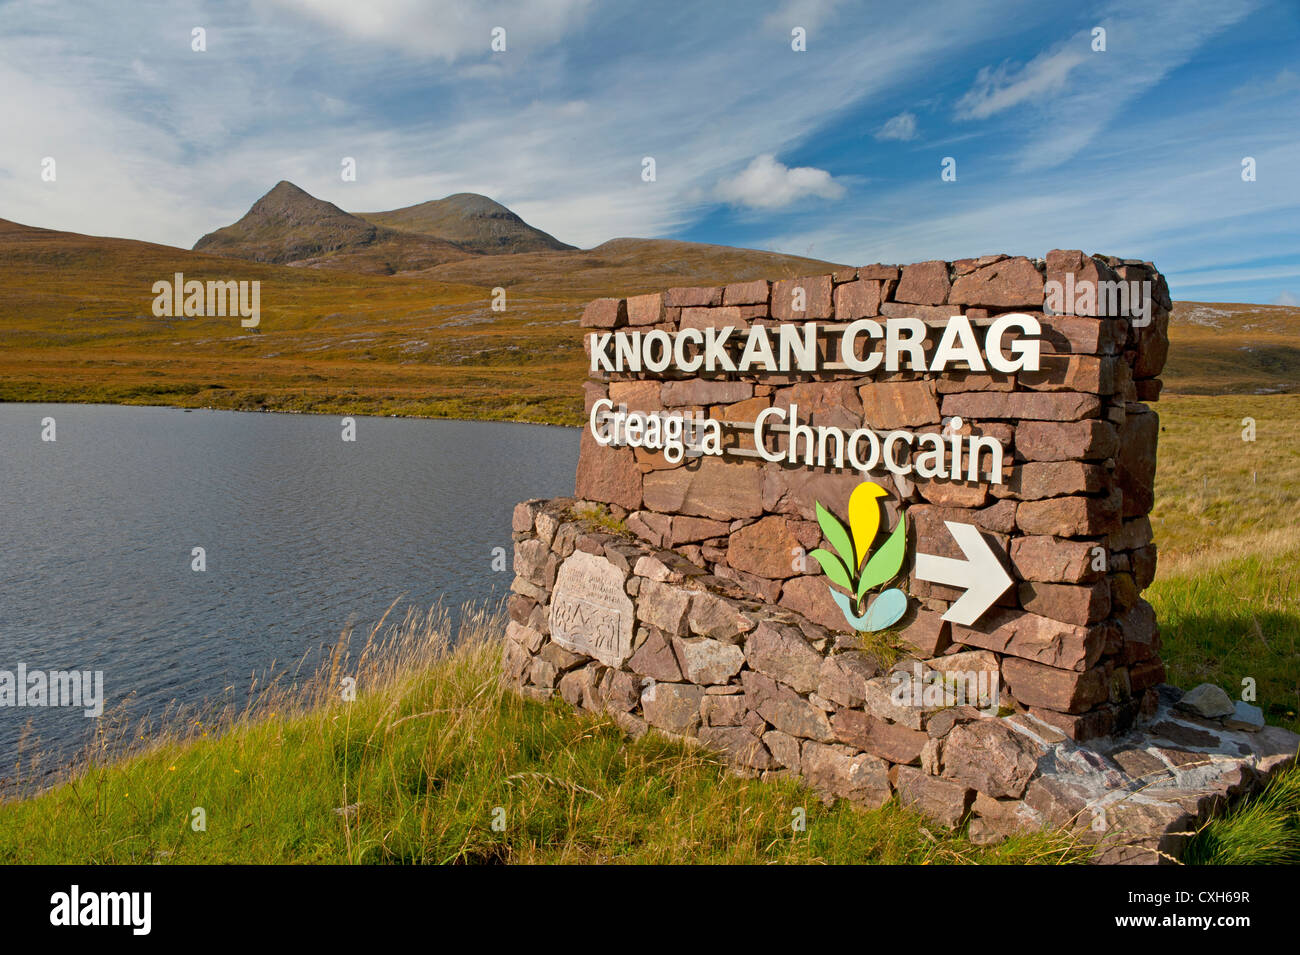 The Geological Crag sign at Knockan, in Wester Ross. Scotland.   SCO 8562 Stock Photo